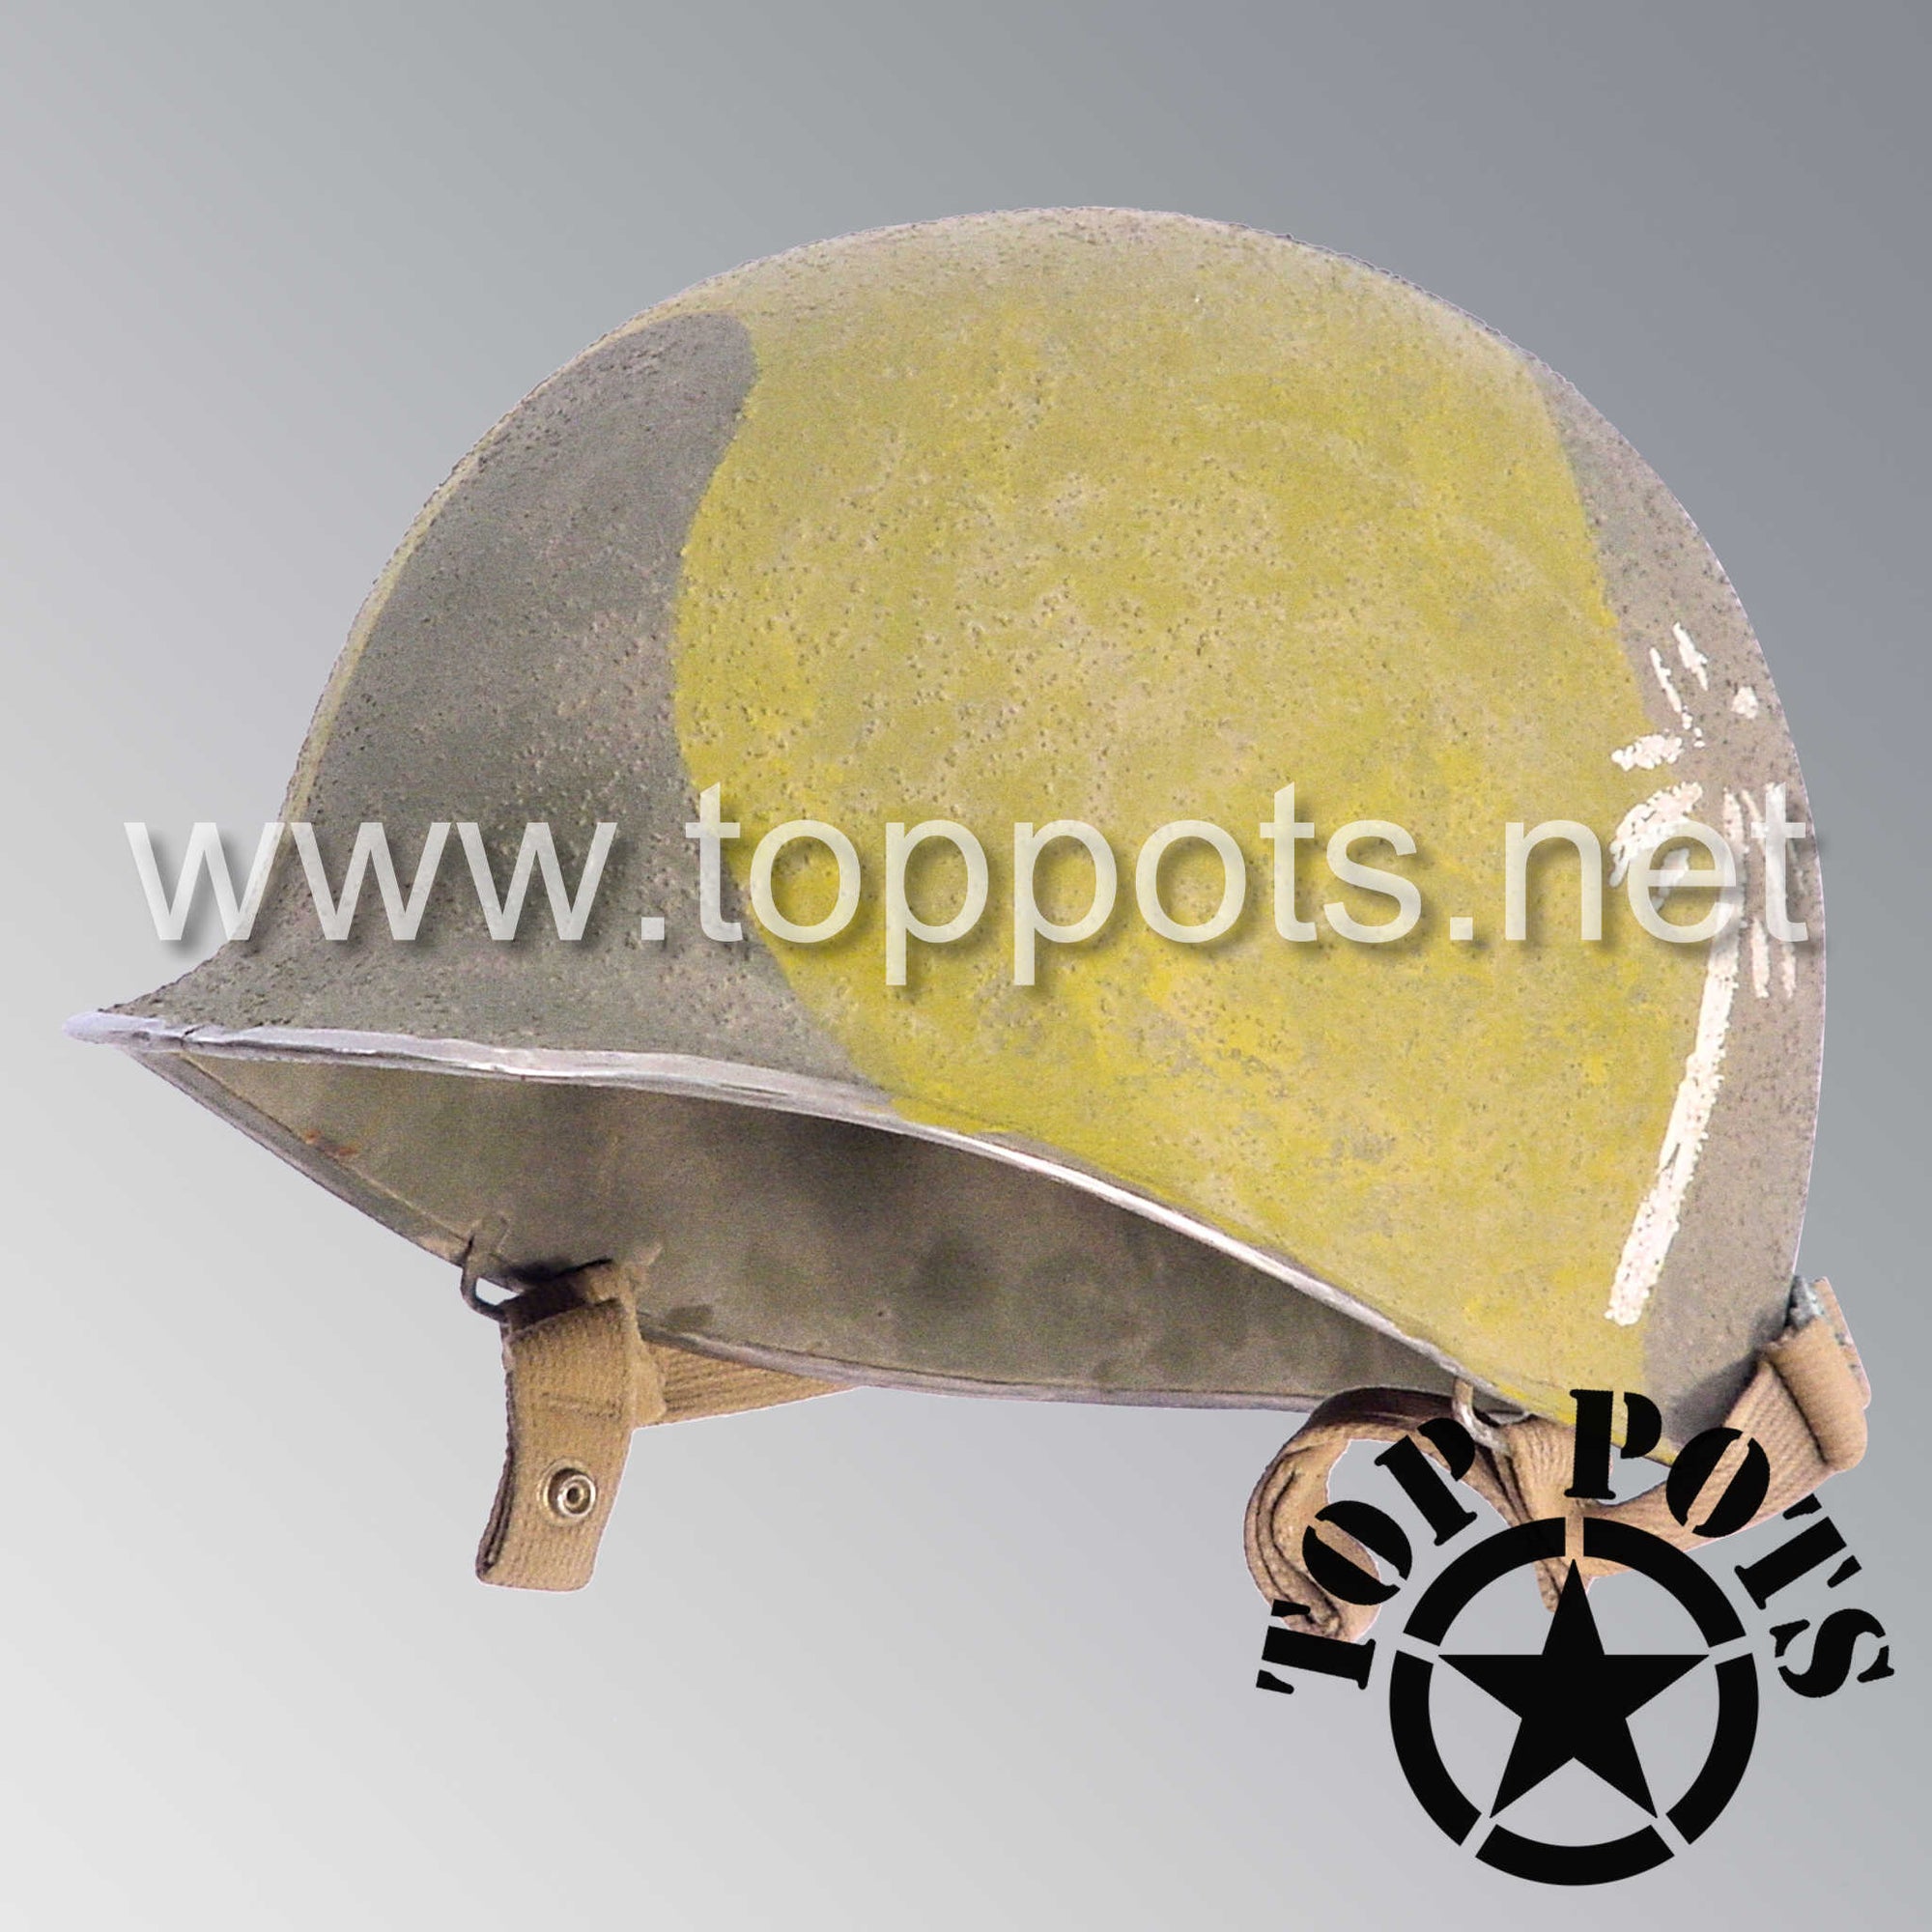 WWII US Army Aged Original M1C Paratrooper Airborne Helmet Fix Bale Shell and 551st PIR Emblem and Chinstraps